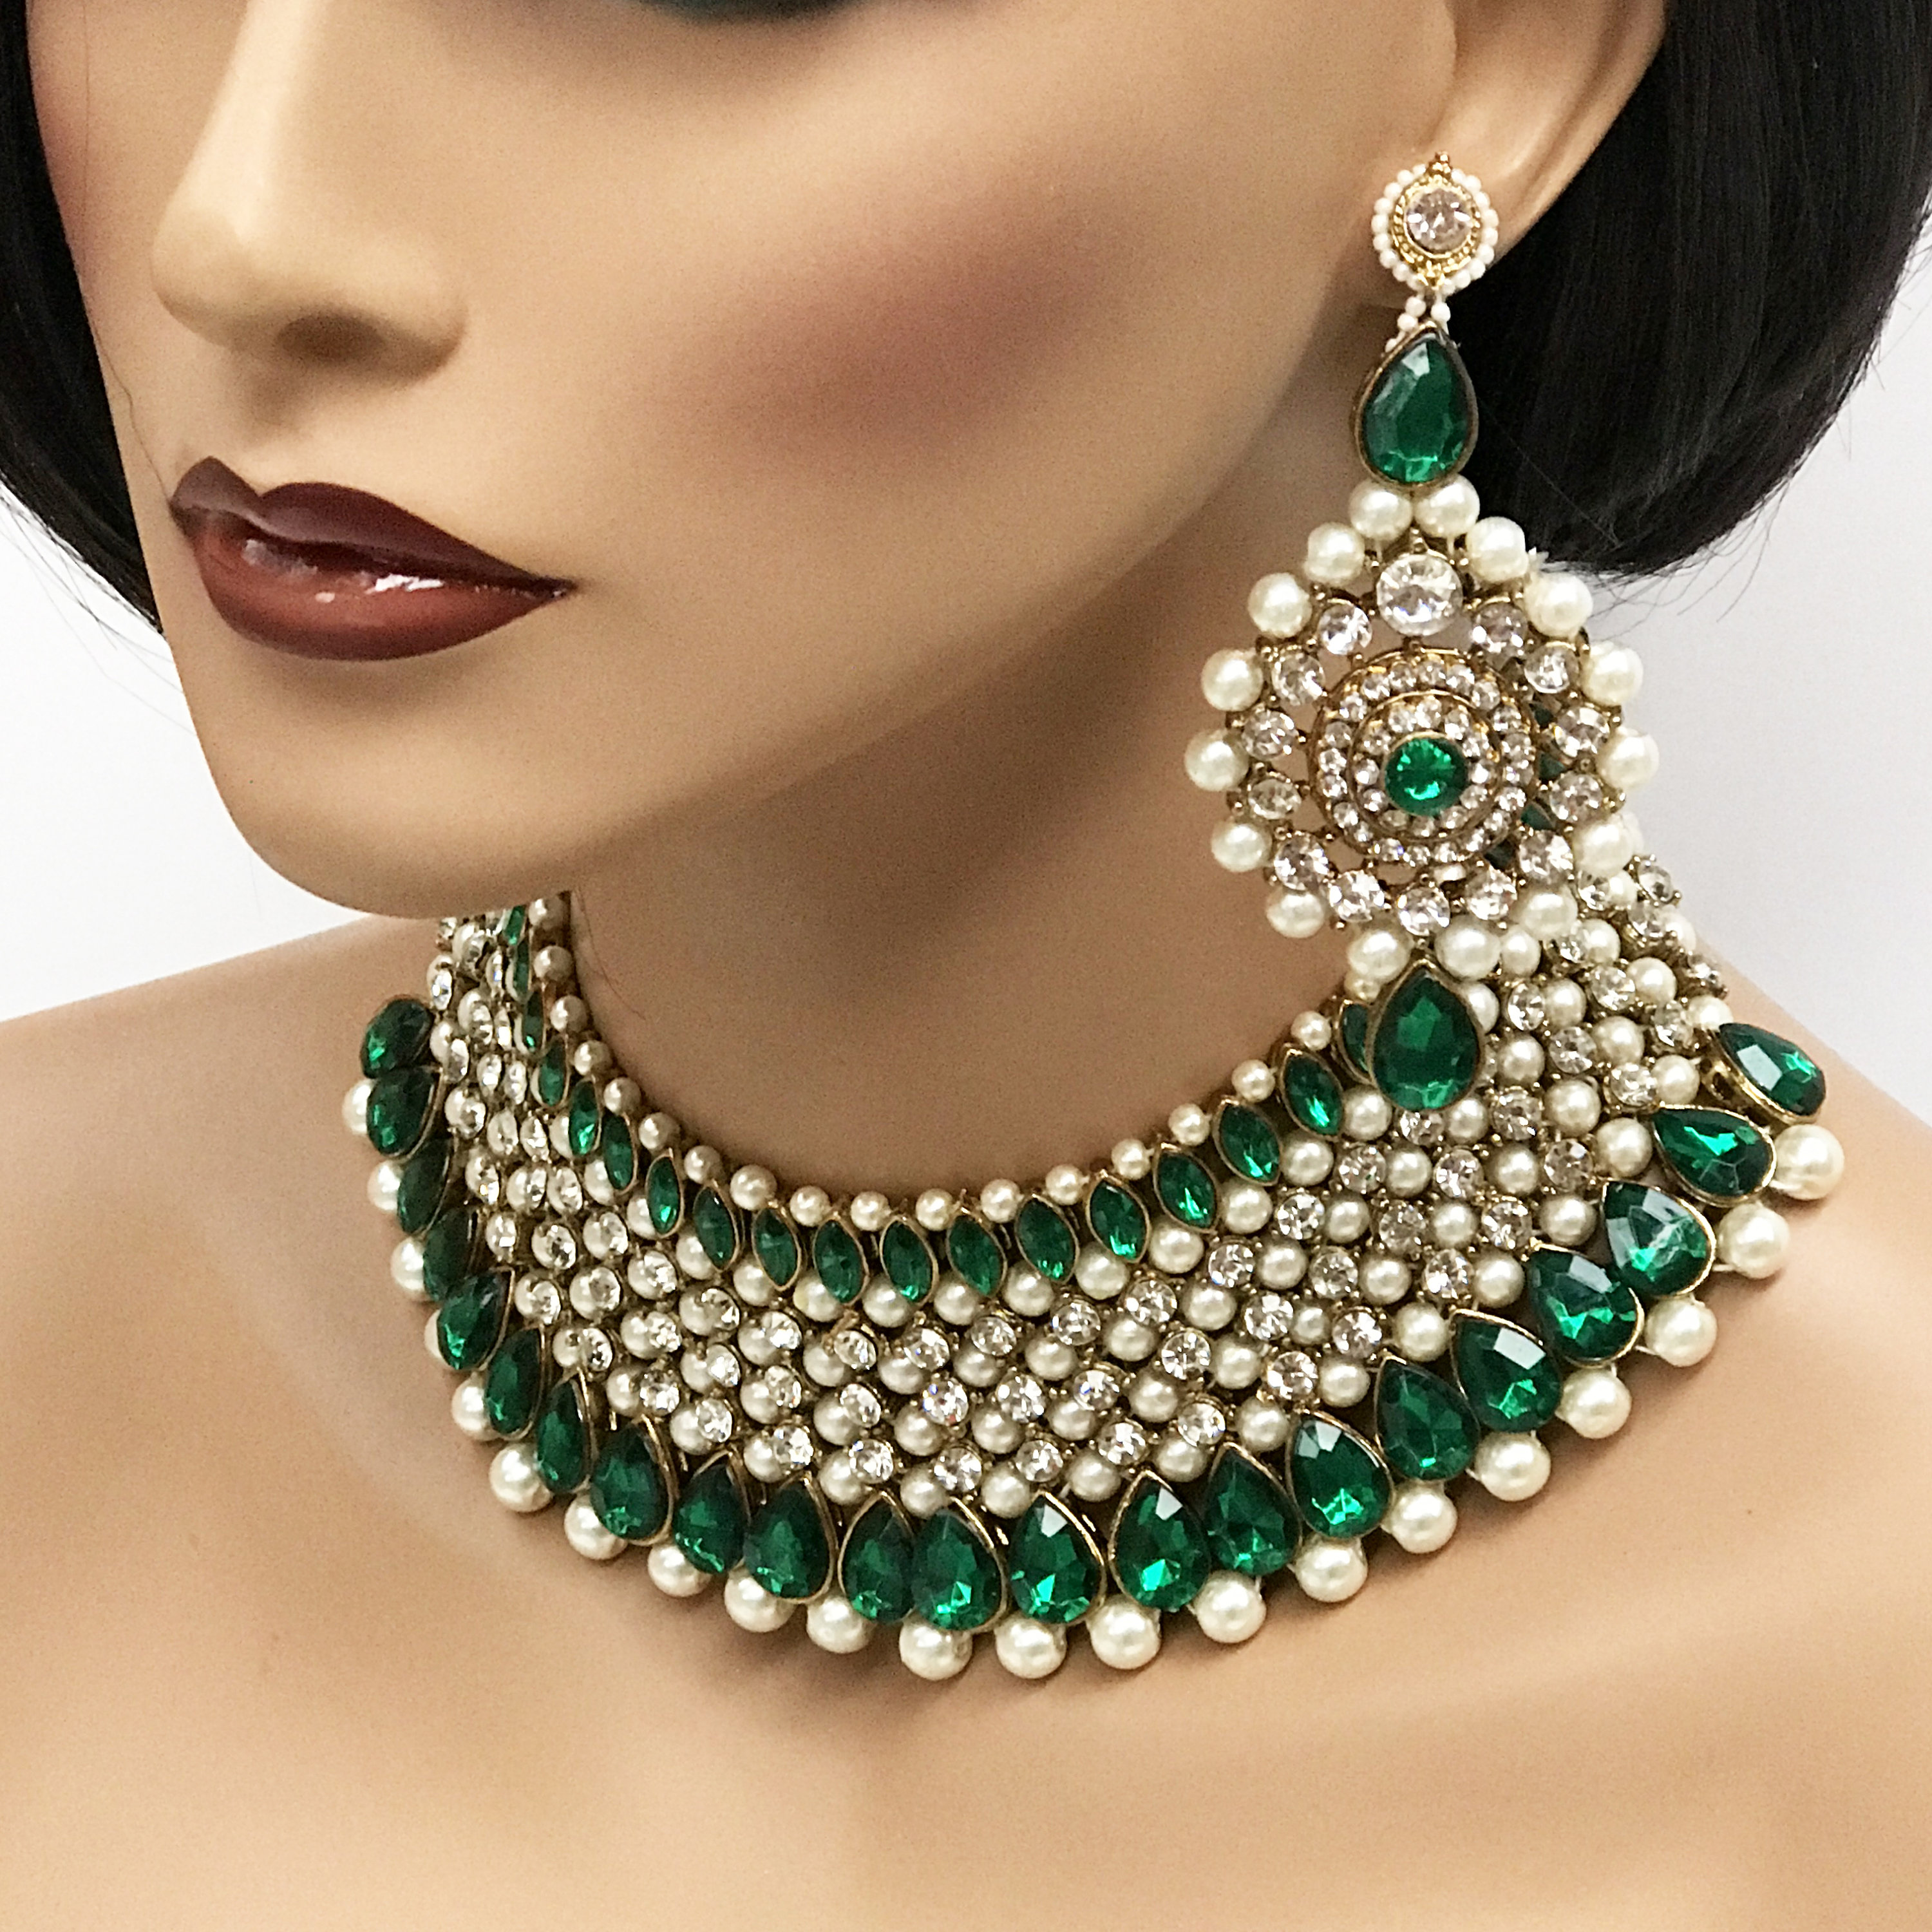 Indian Ethnic Bollywood Gold Tone Pearl Green Kundan Necklace Earrings Jewelry 